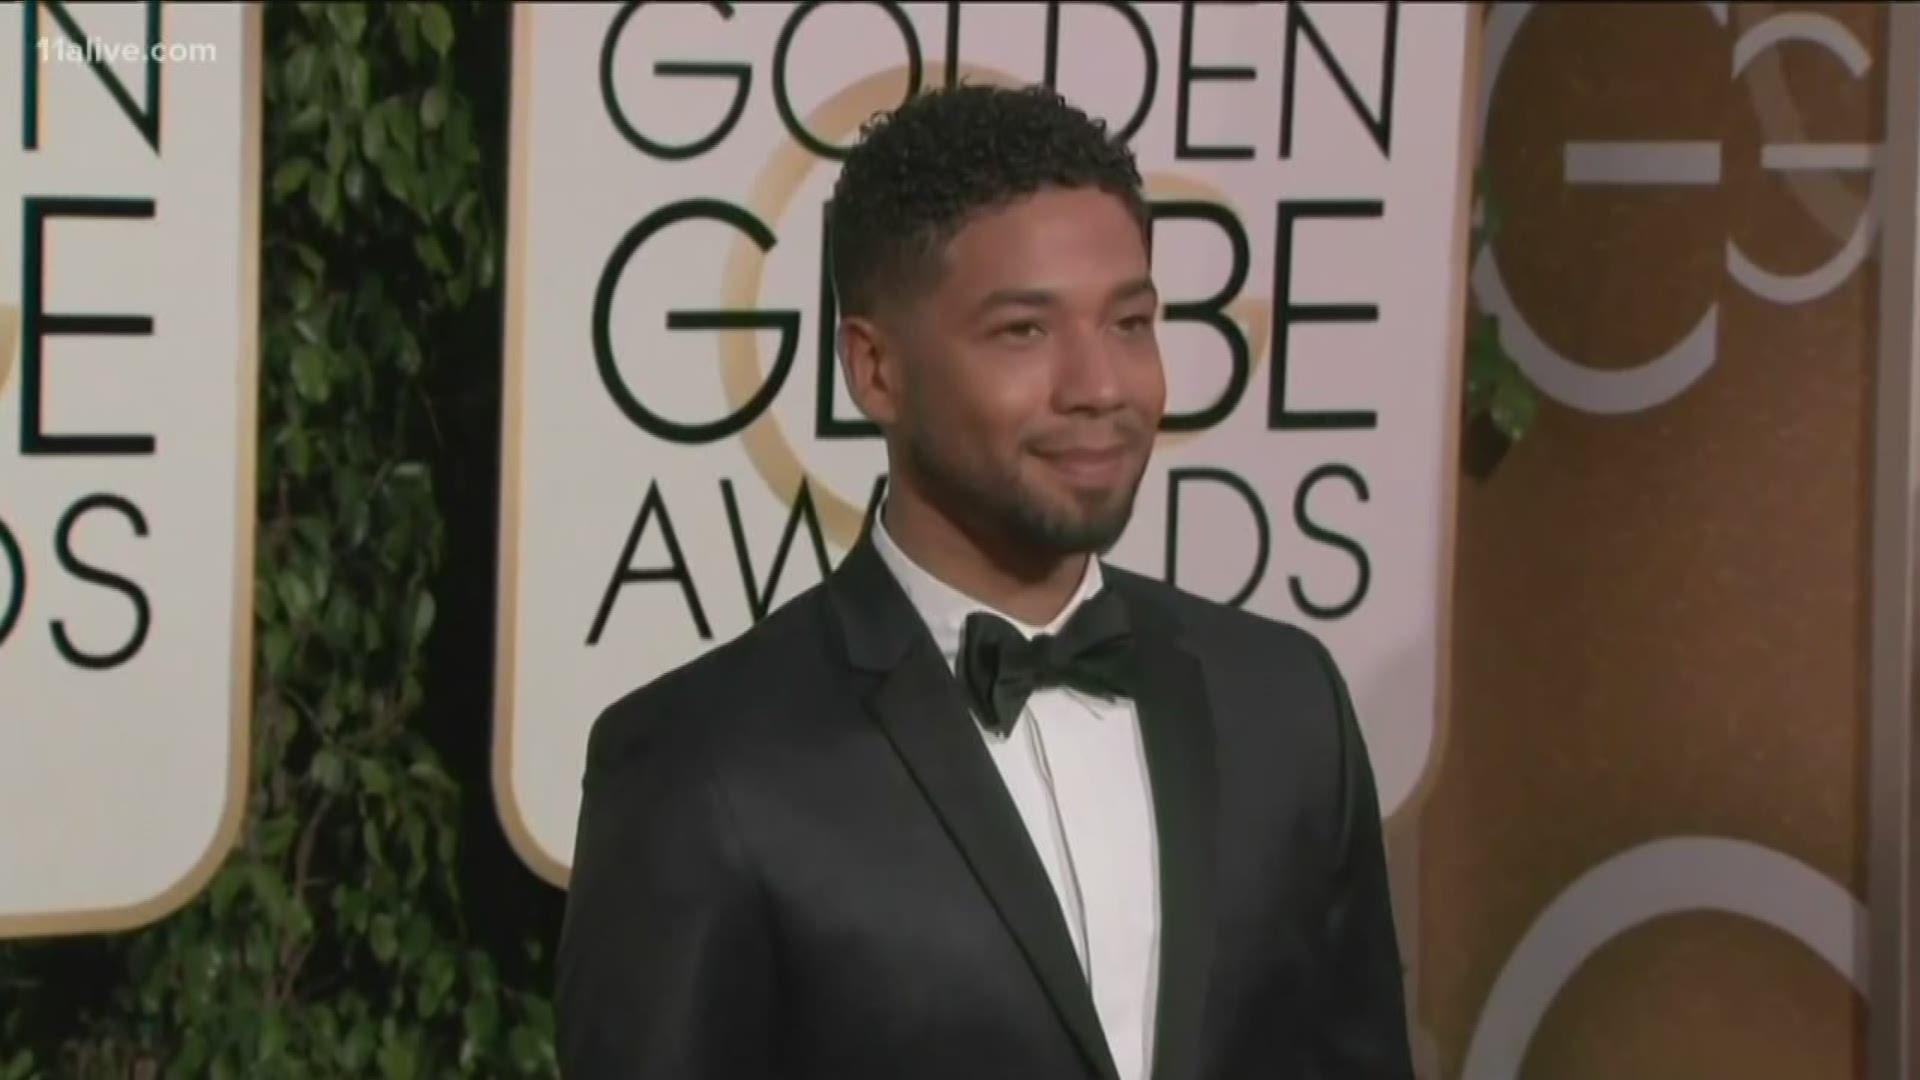 Jussie Smollett walked out of the Cook County jail in Chicago on Thursday about two hours after a hearing in which the judge set his bond at $100,000.